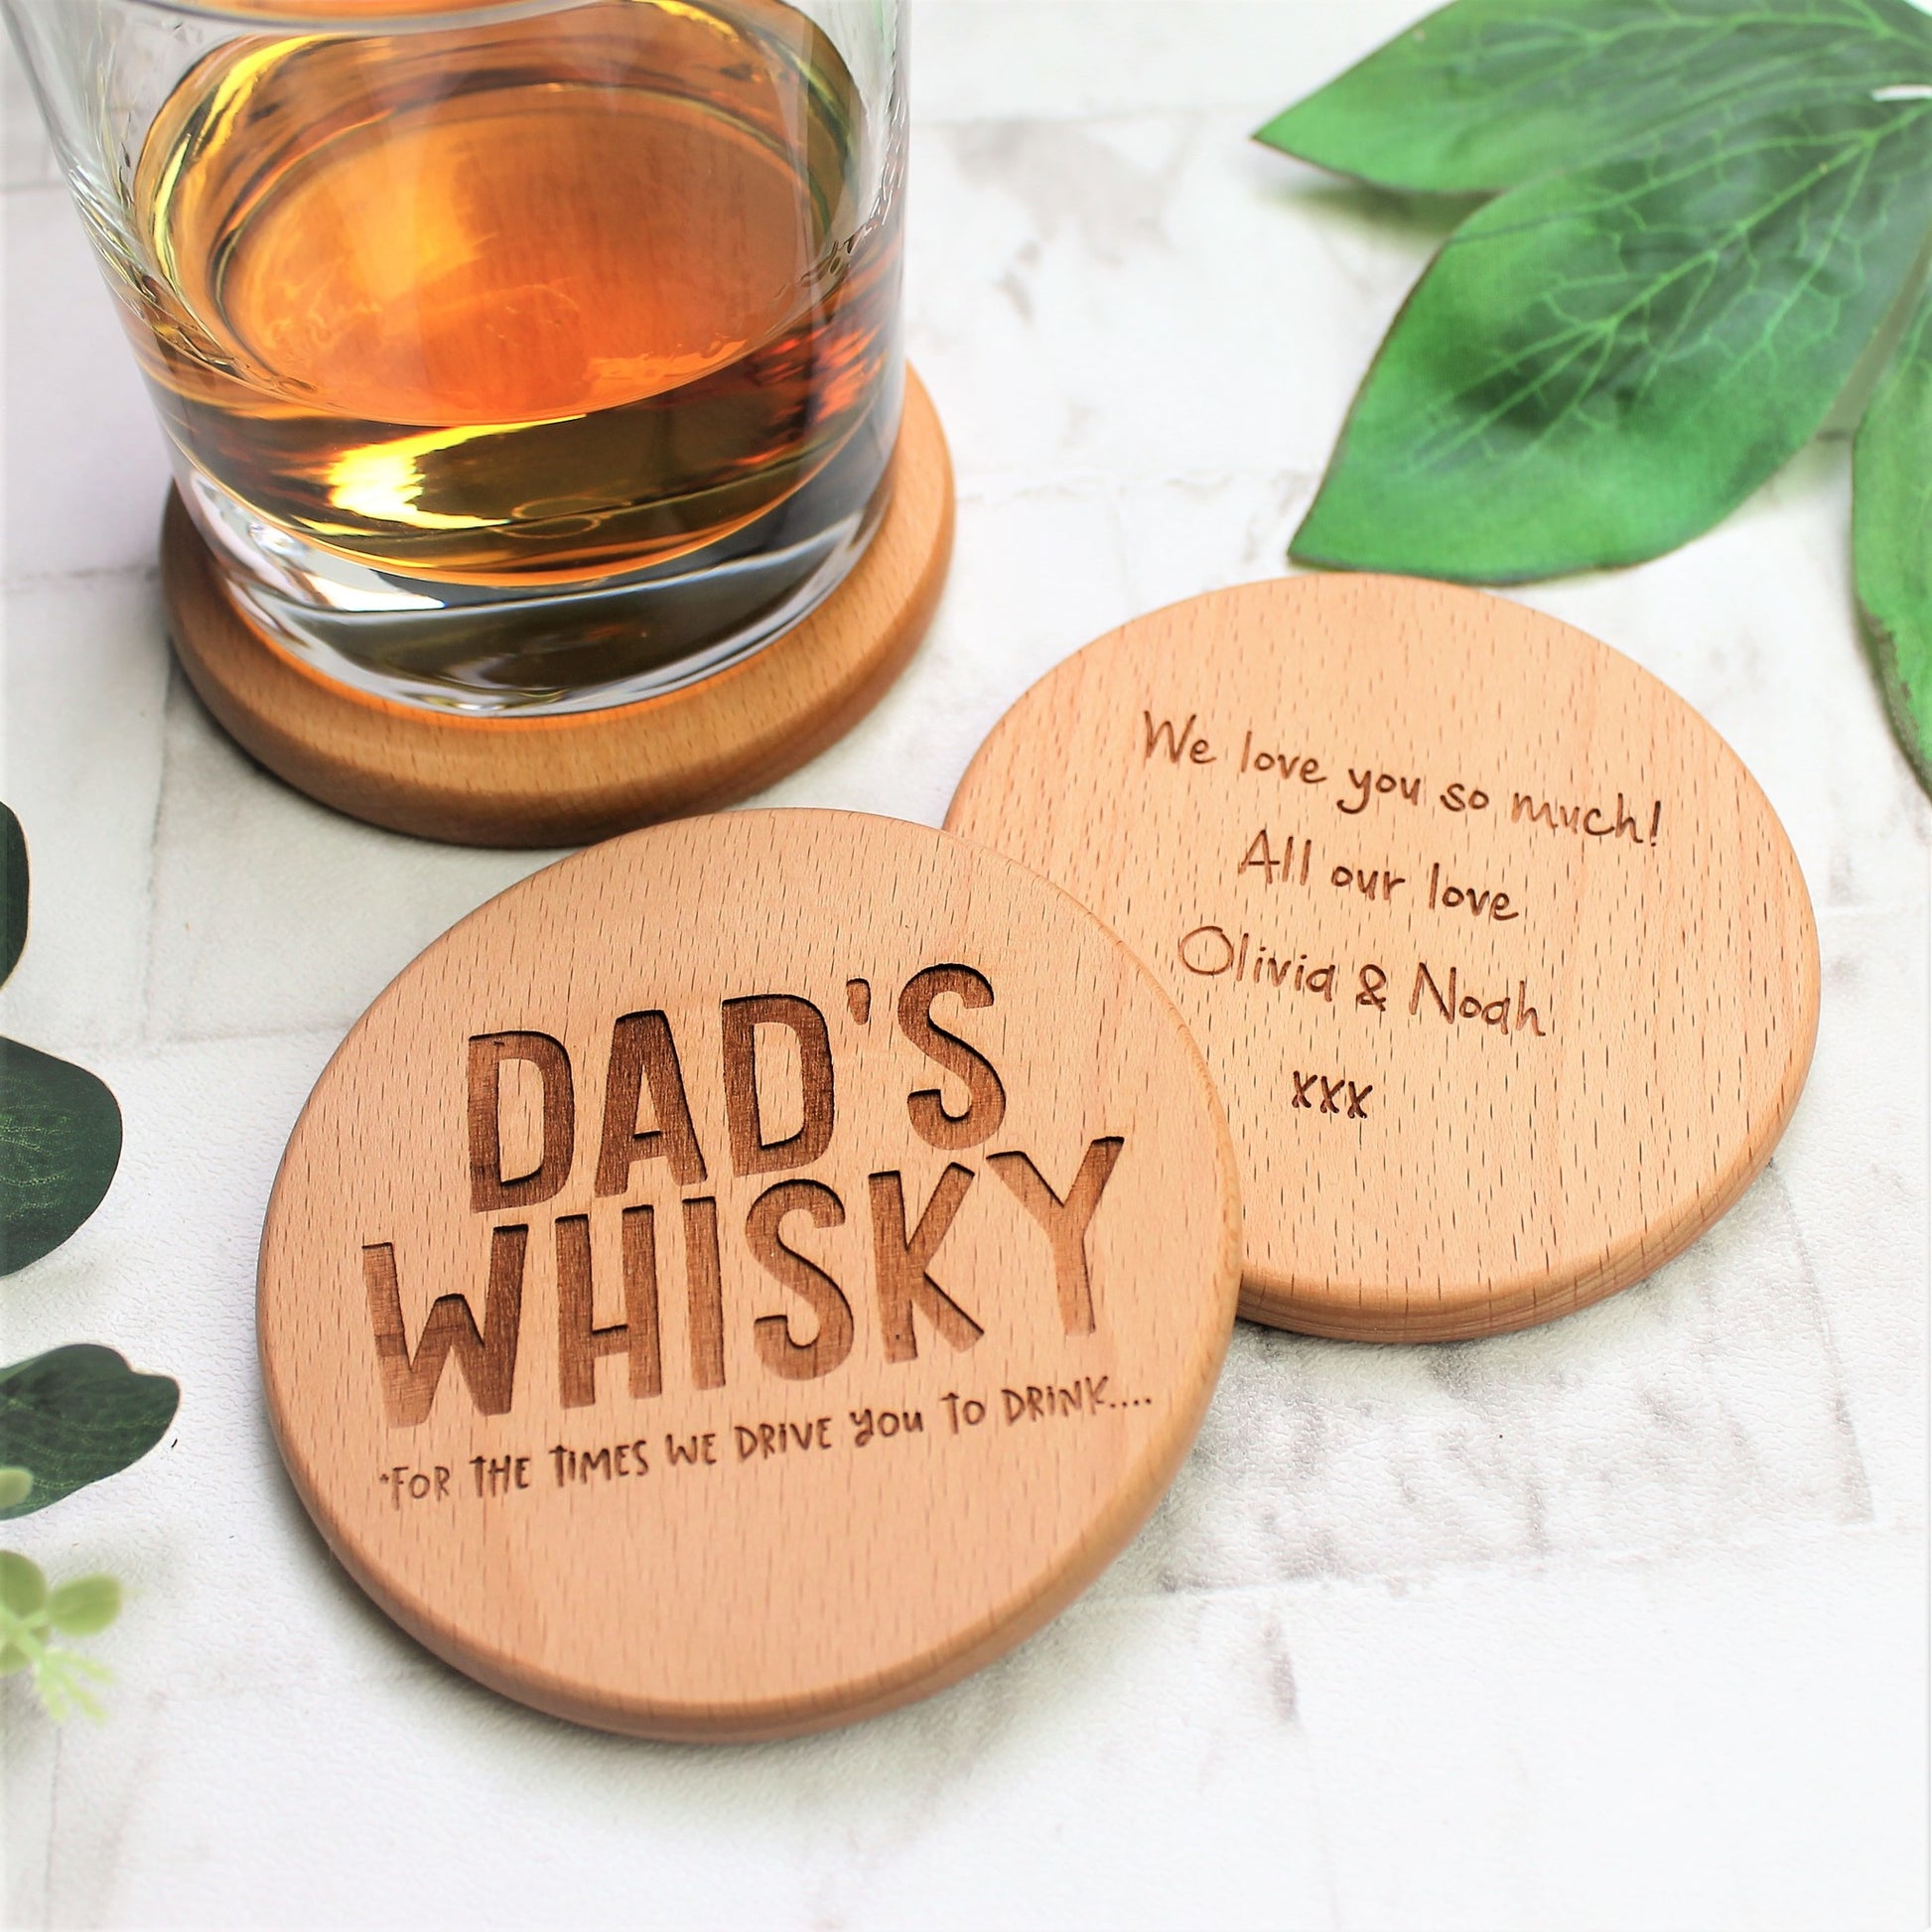 dad's whisky funny wooden coaster for fathers day, made from round wood